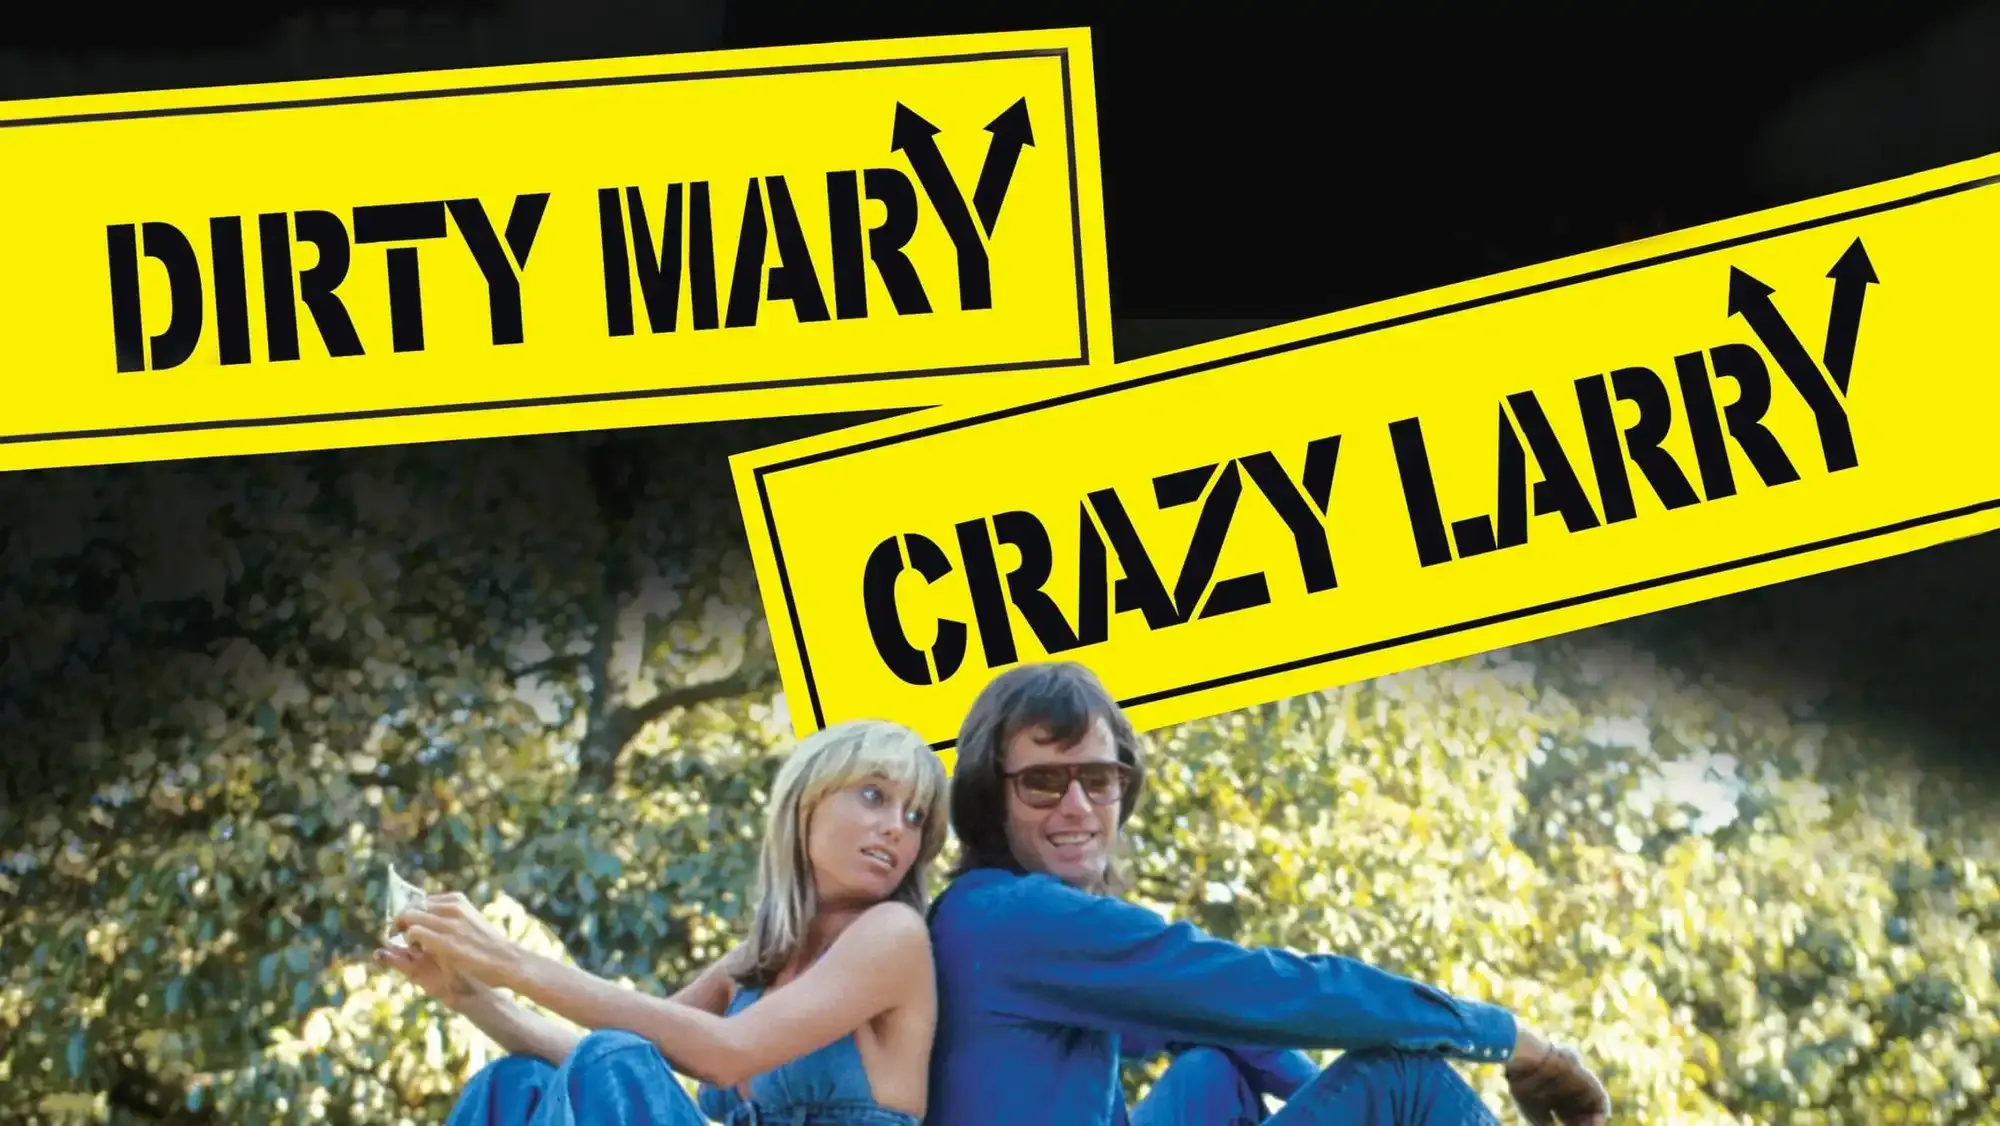 Dirty Mary Crazy Larry movie review